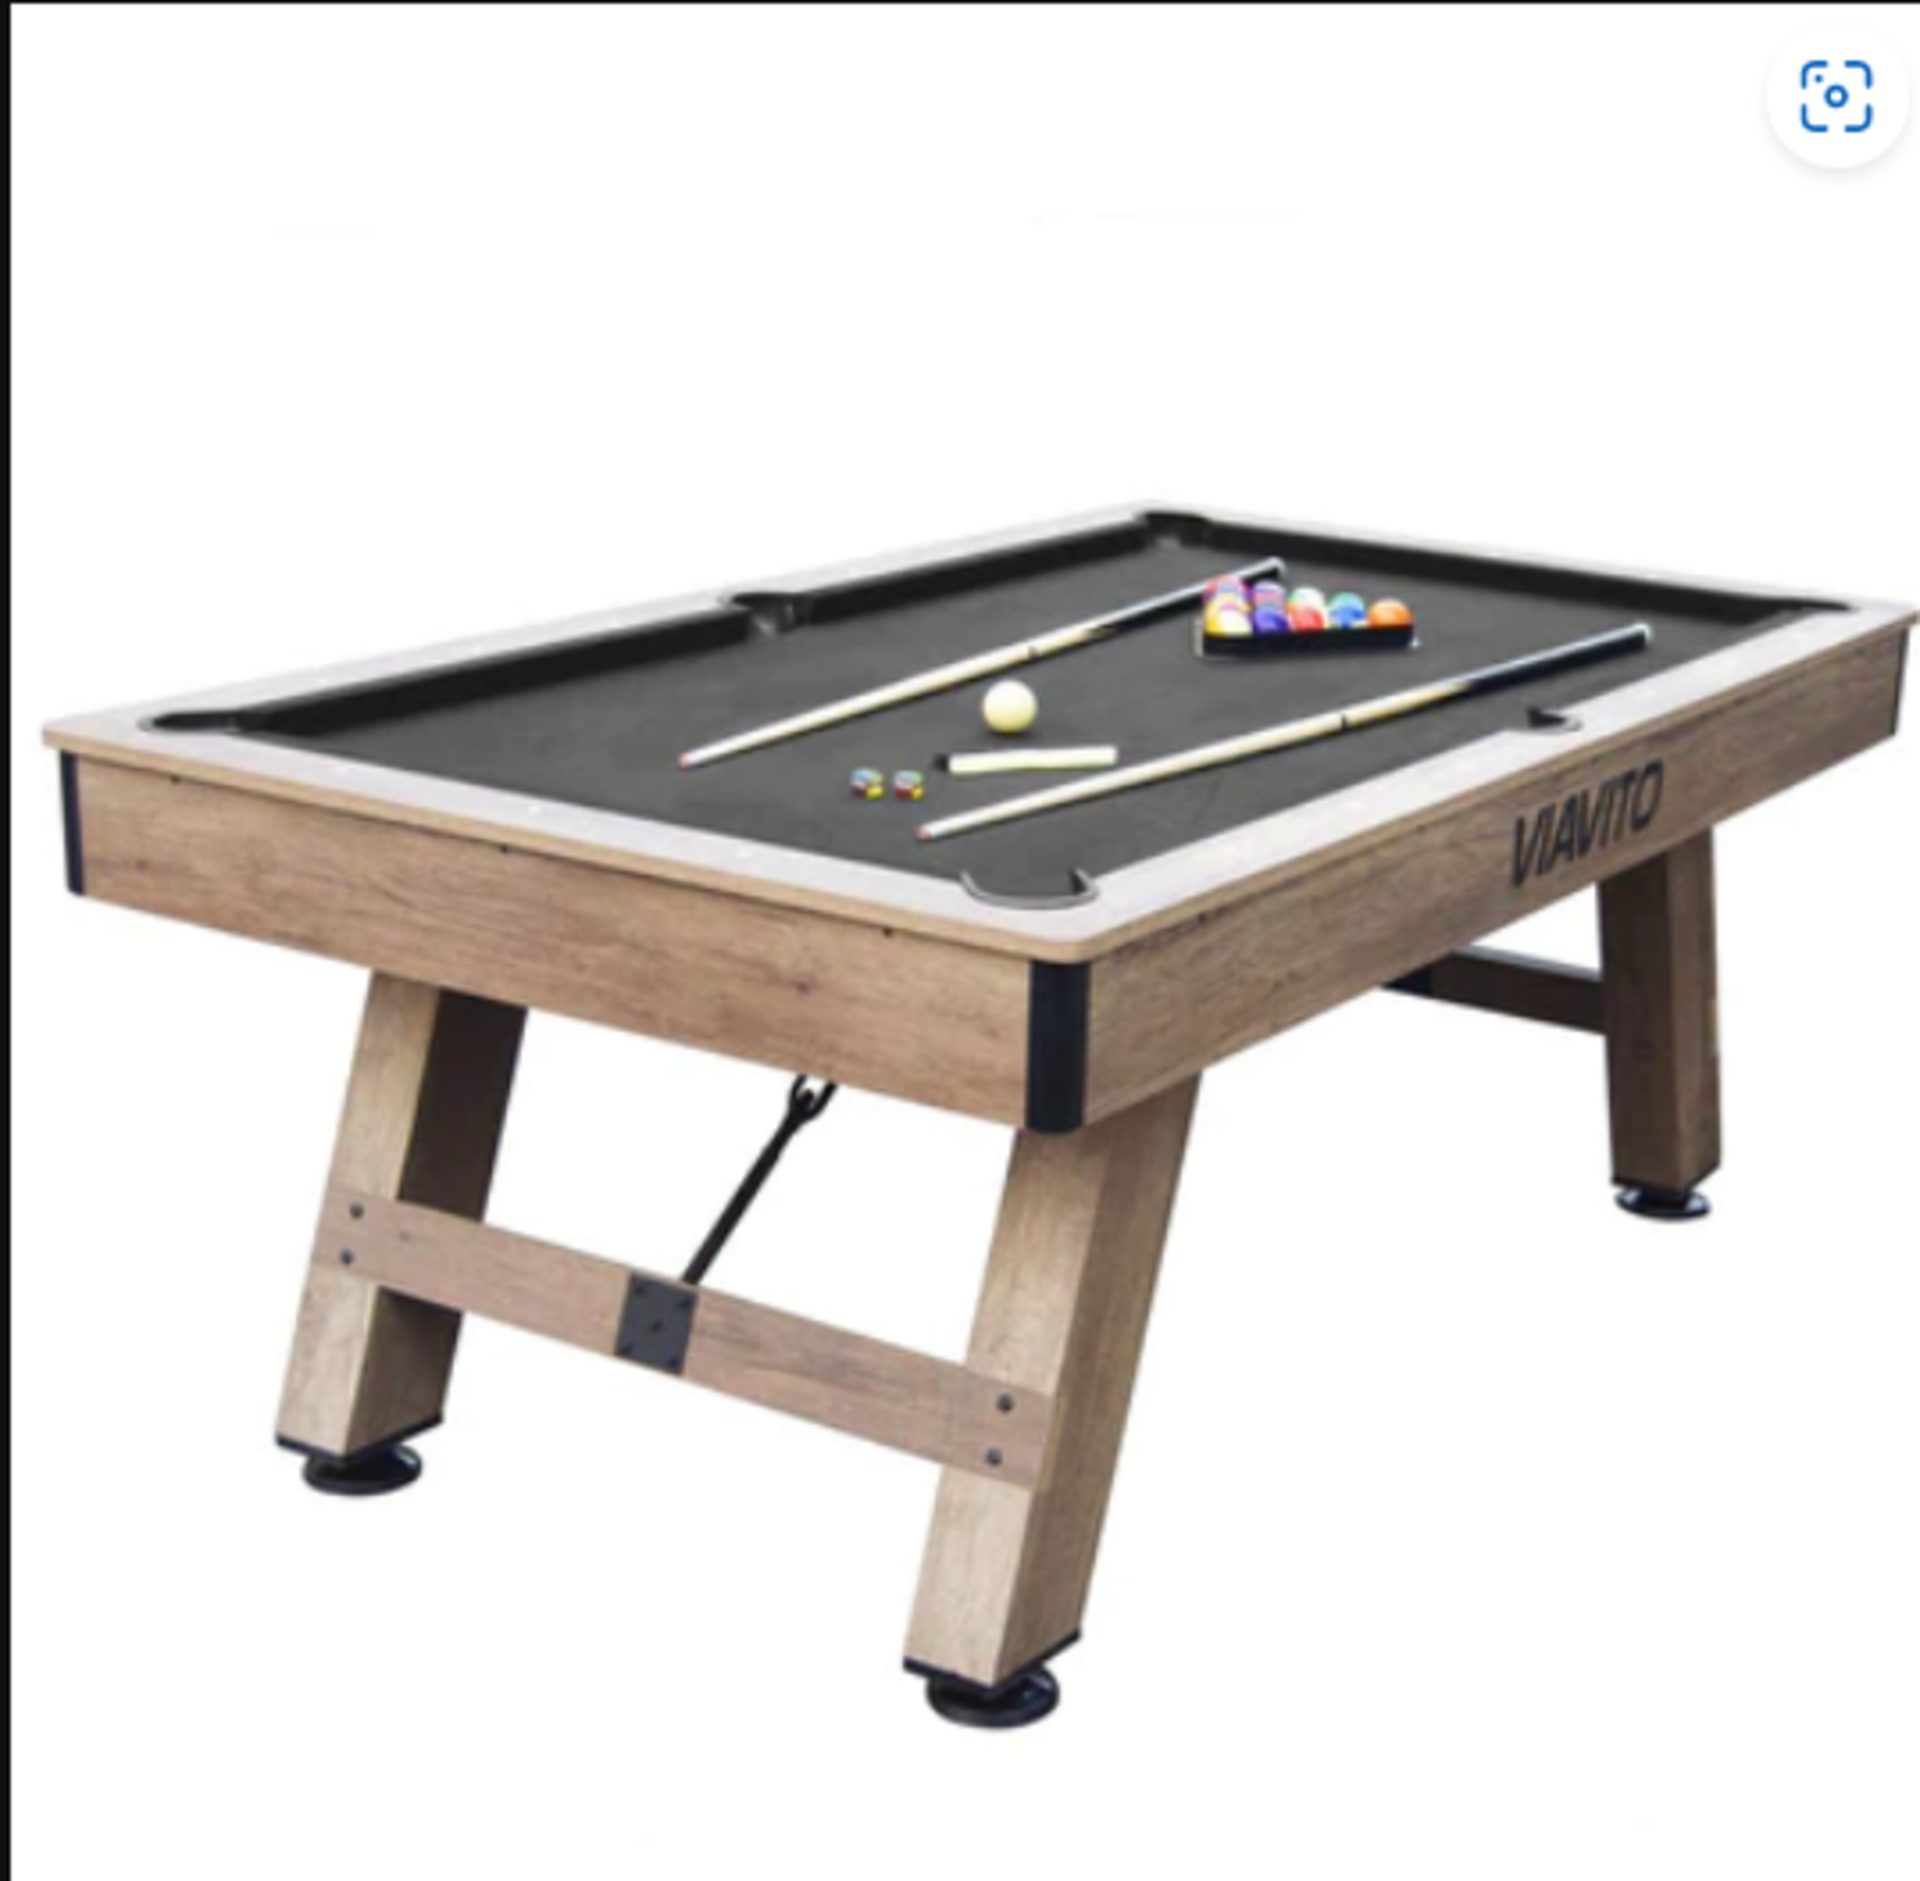 Sweatband Viavito PT500 7ft Pool Table RRP ?549.00, comes with pool balls, triangle and cues,